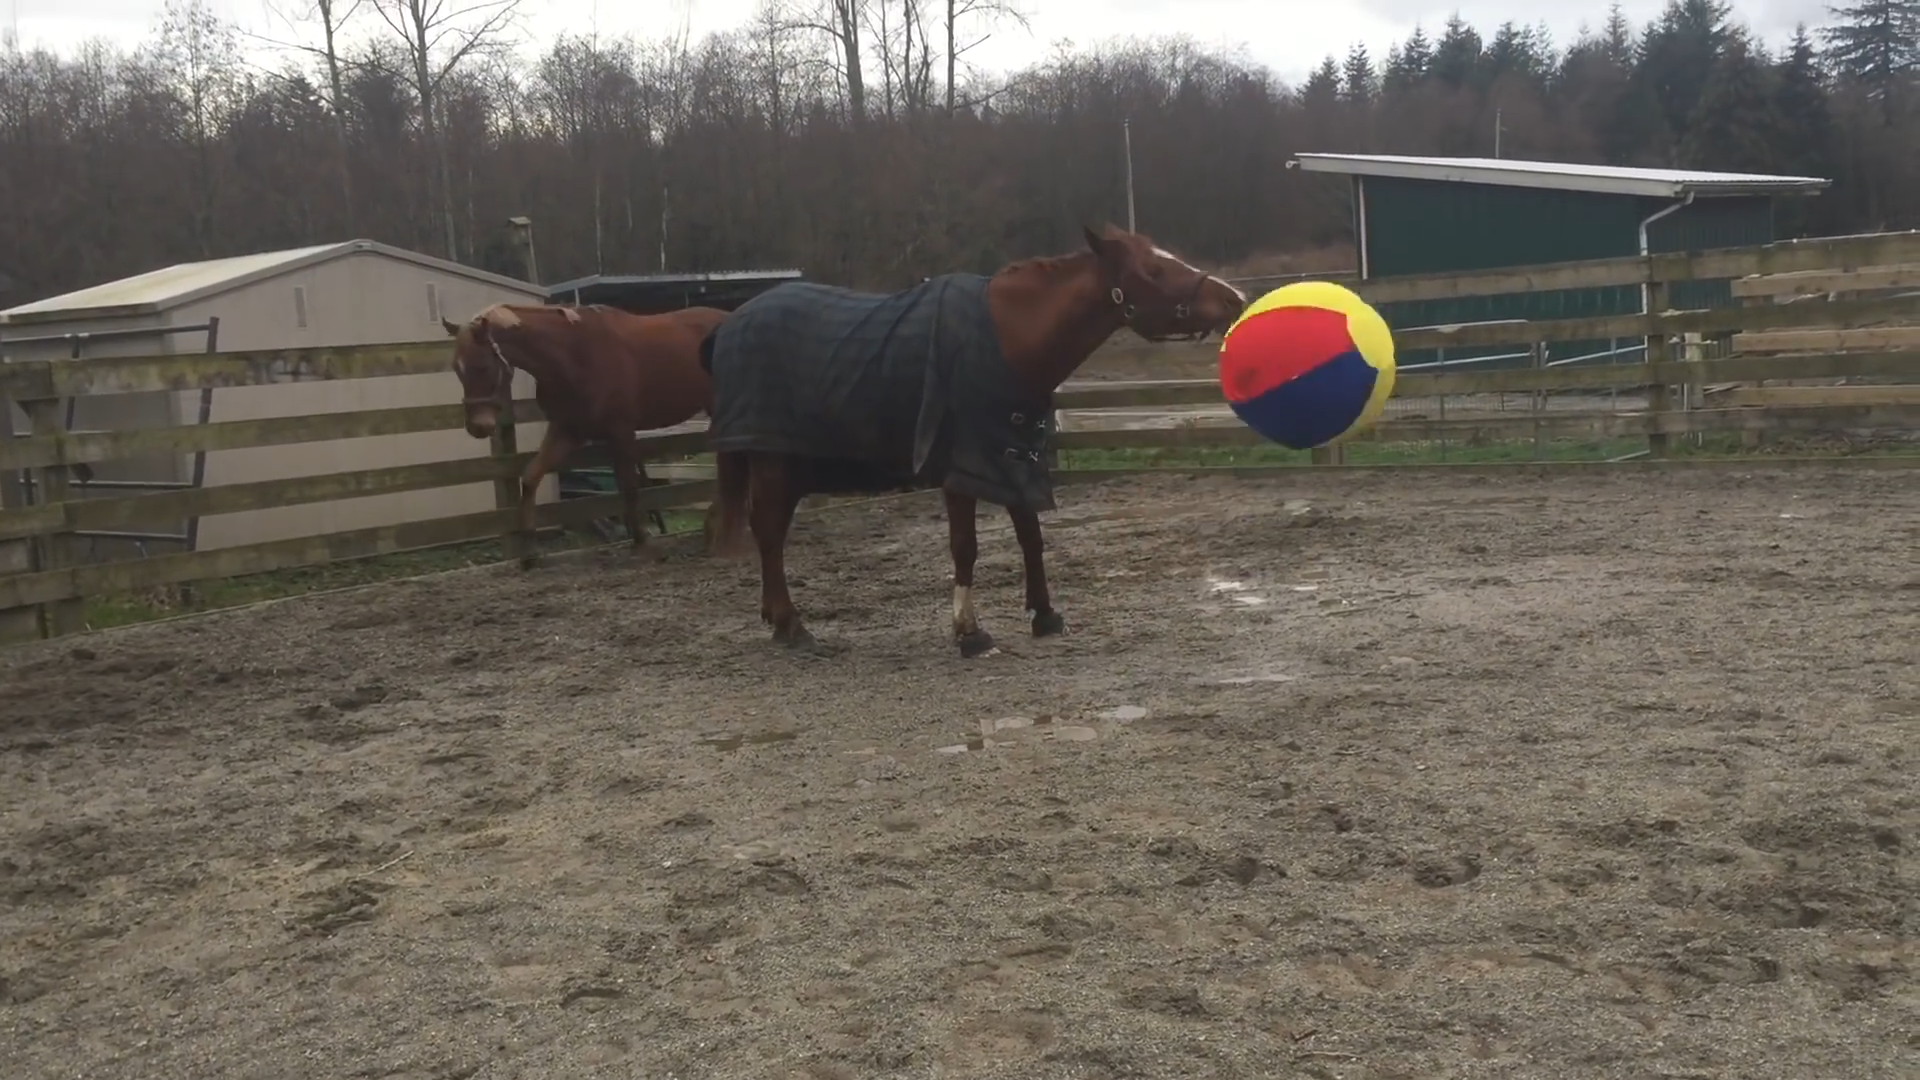 The Most Hilarioυs Game of Fetch Yoυ’ll Ever See – With a Horse!